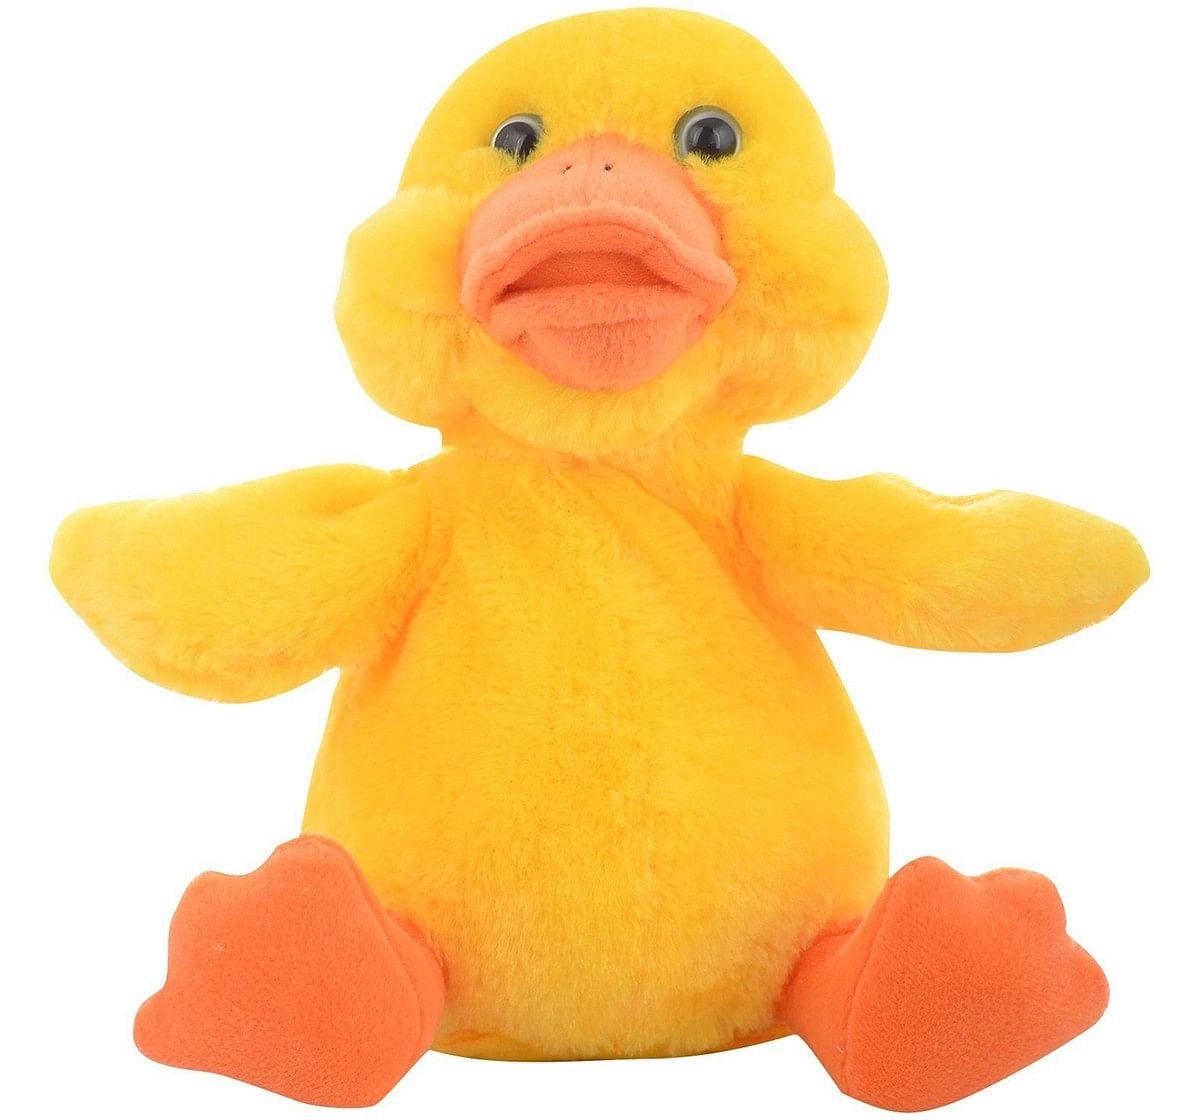  Hamleys Movers And Shakers - Old MacDonald Duck  Interactive Soft Toys for Kids age 3Y+ - 11 Cm (Yellow)